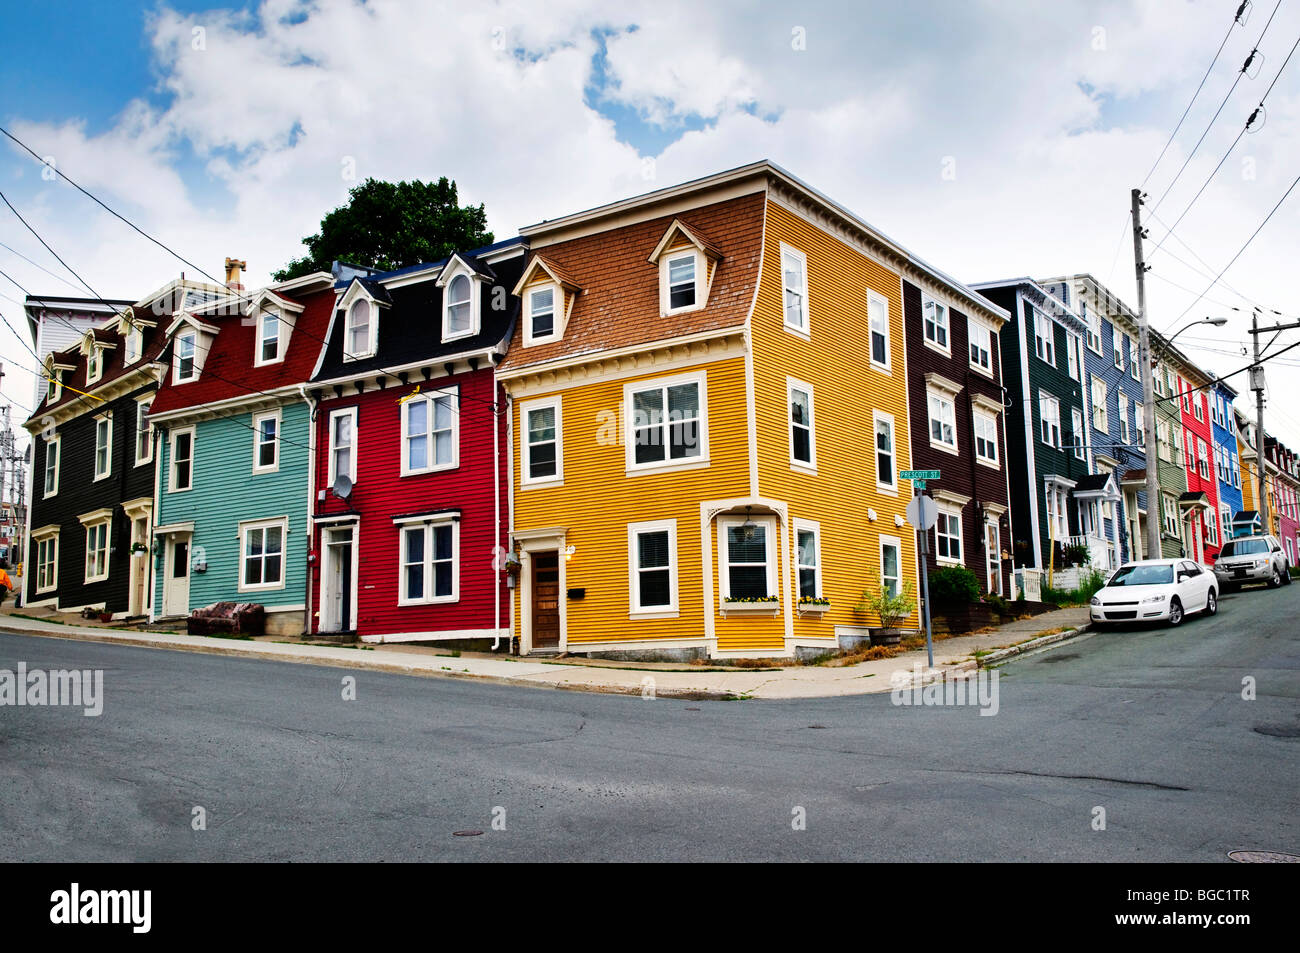 Colorful houses on street corner in St. John's, Newfoundland, Canada Stock Photo